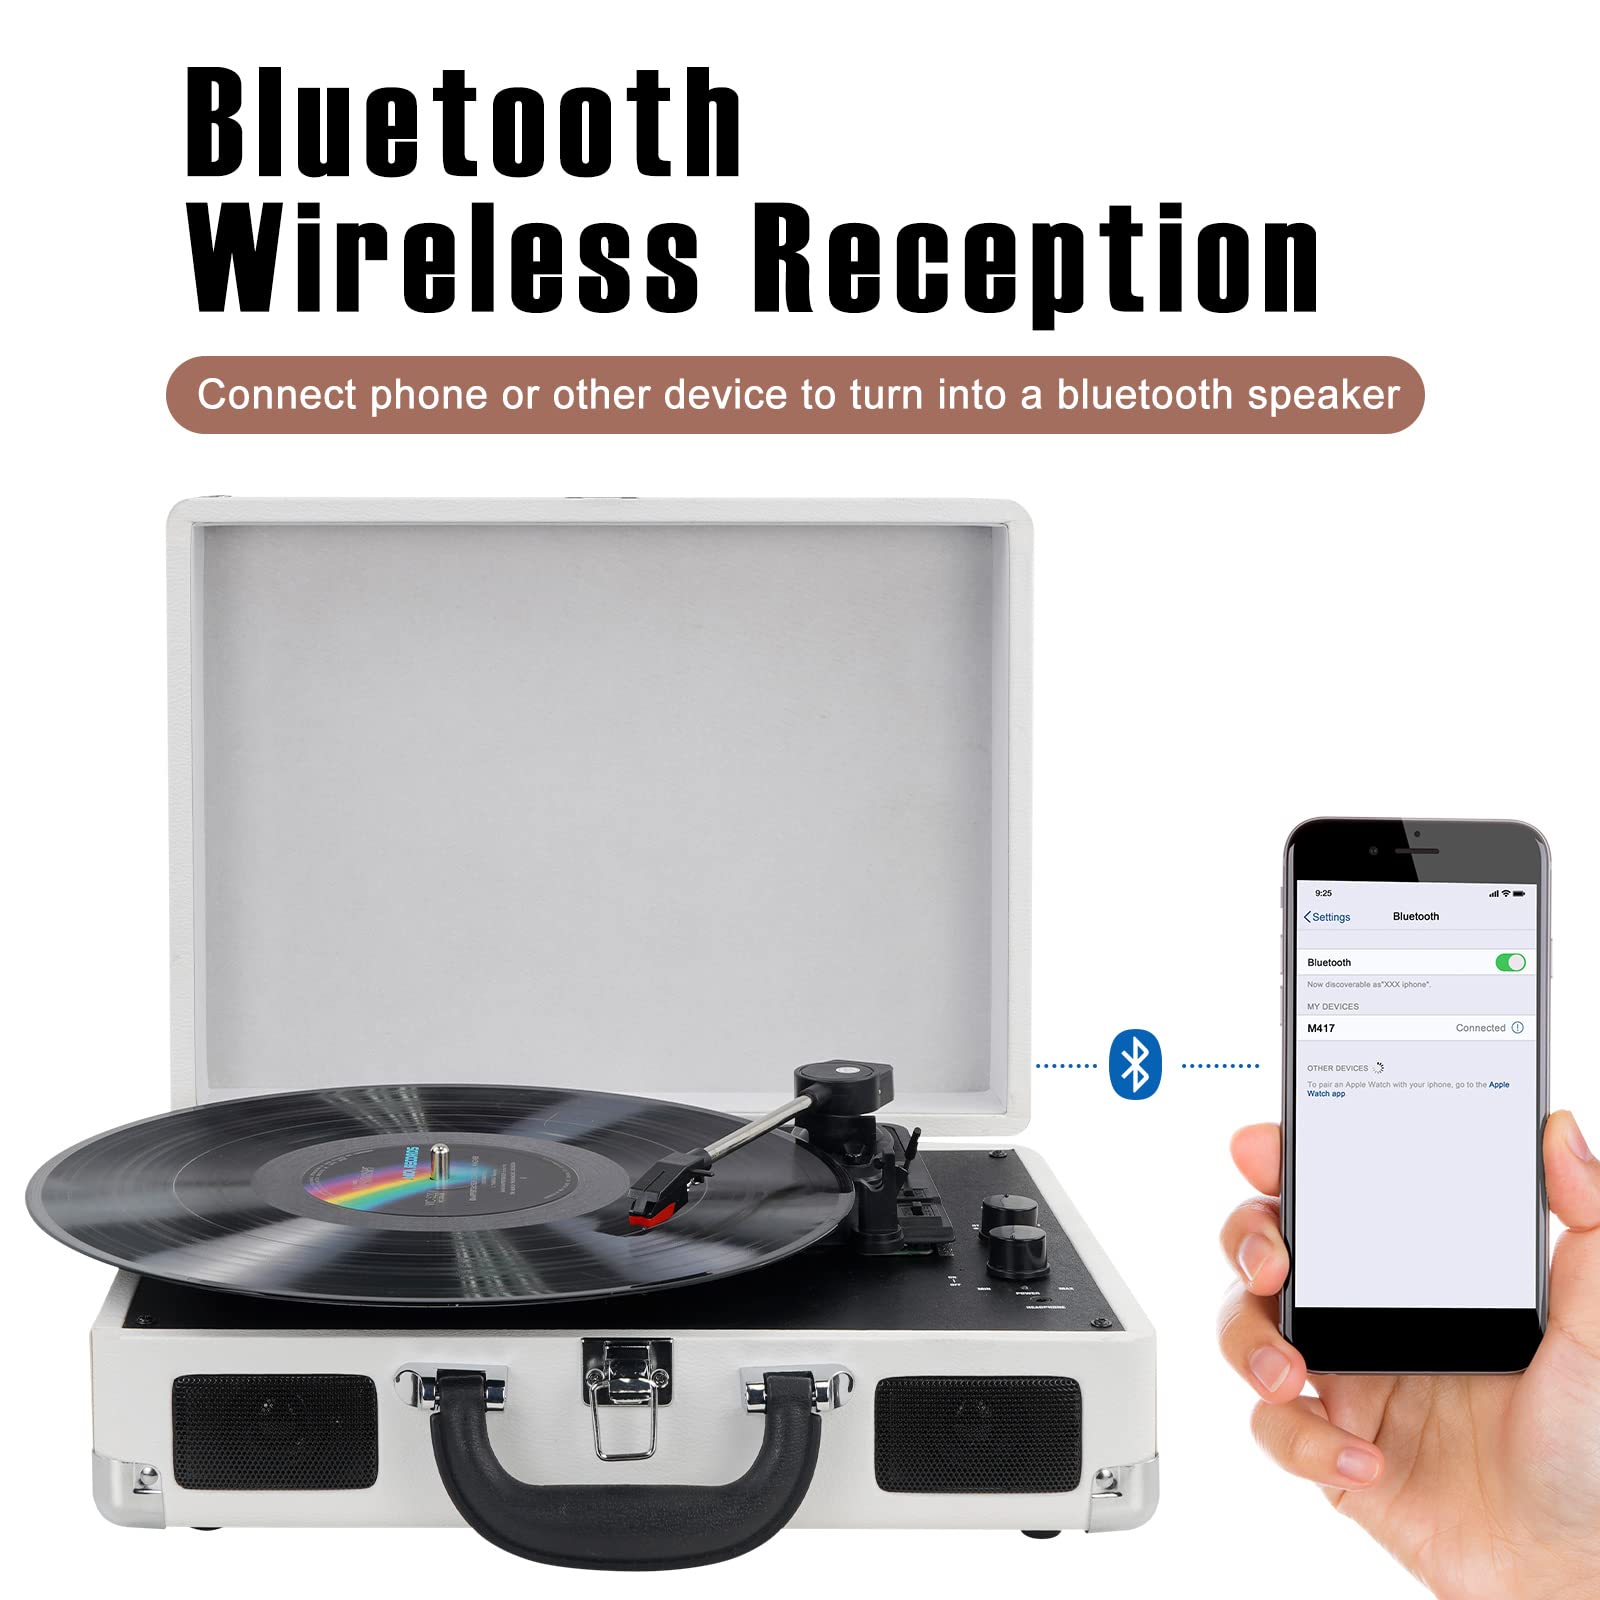 Vinyl Record Player Wireless Turntable Bluetooth 3-Speed Portable Vintage Suitcase with Built-in Speakers, Includes Extra Stylus/RCA Out/AUX IN